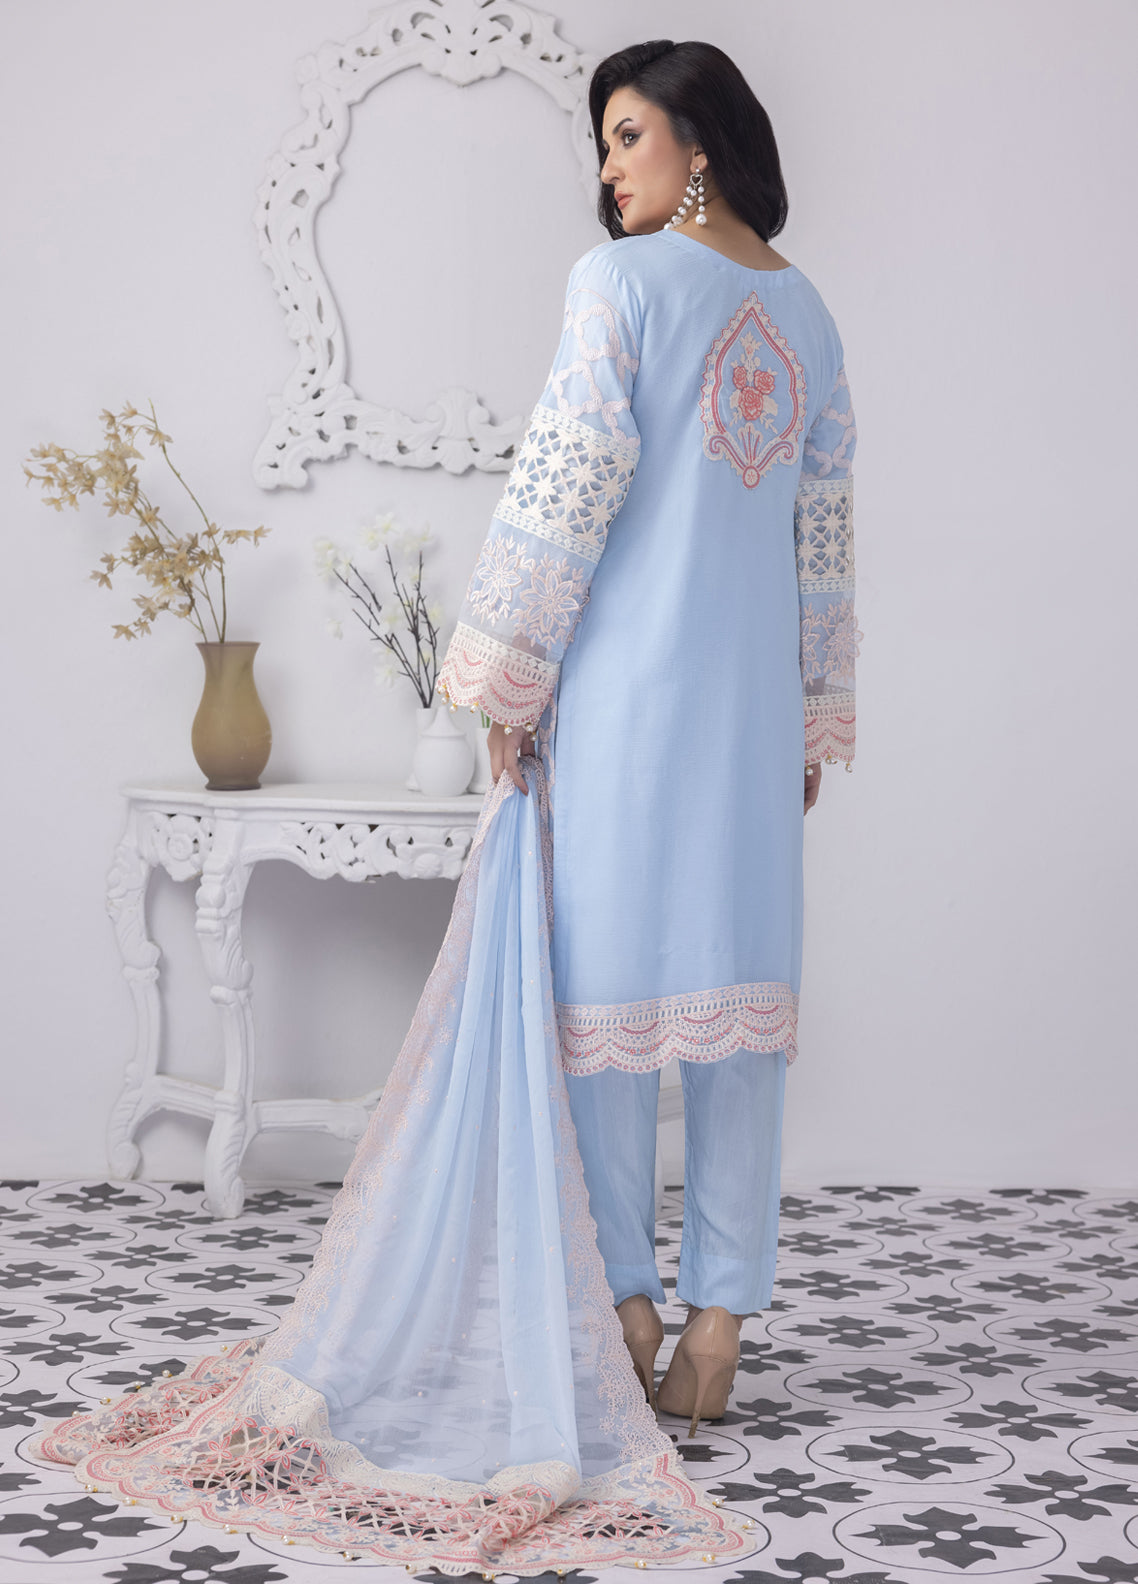 Mansoob By Polawn Embroidered Stitched 3 Piece Chiffon Suit PD-23-104 Ready to Wear